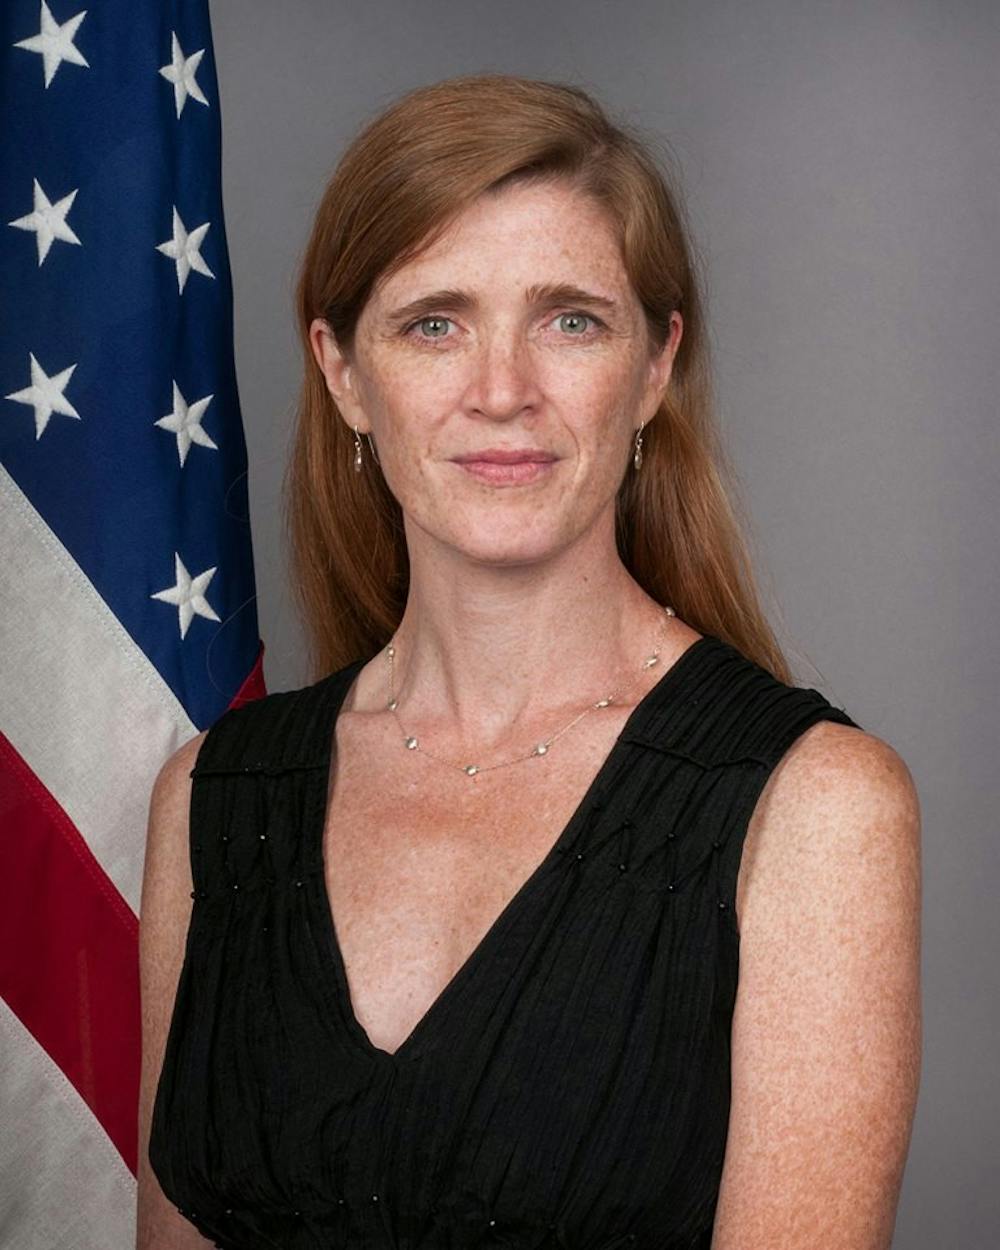 This year's commencement speaker will be UN representative Samantha Power, who is also a member of President Obama’s cabinet and a Pulitzer-prize winning author.